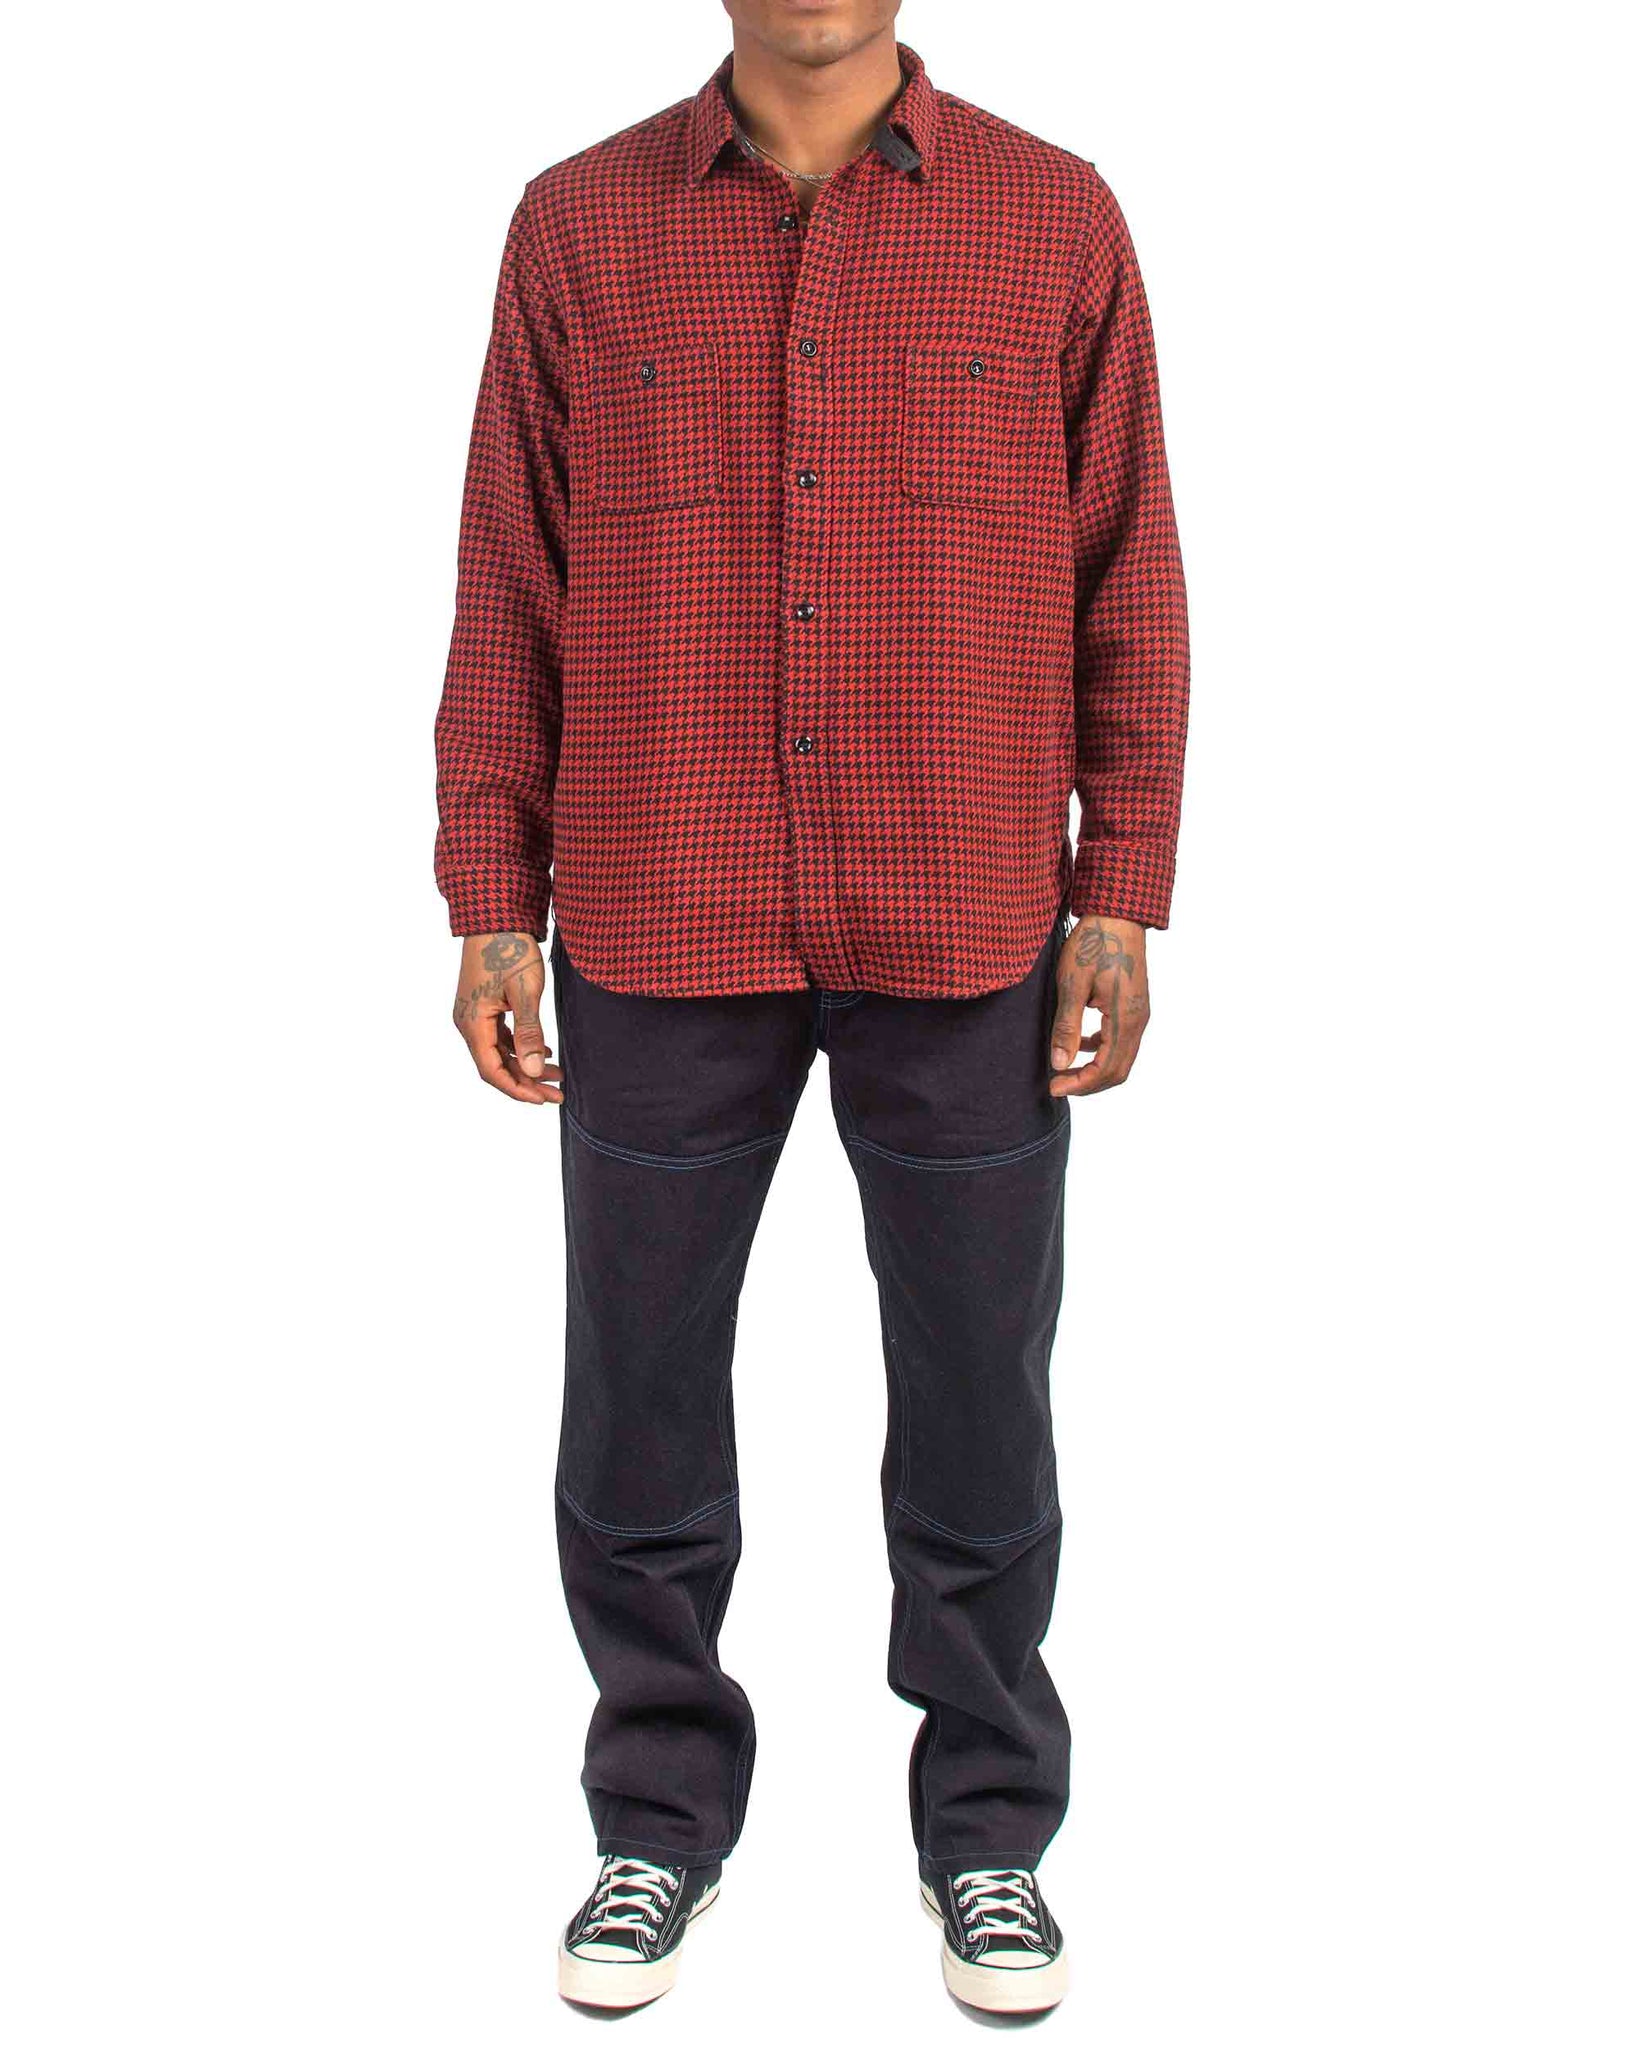 The Real McCoy's MS21102 8HU Houndstooth Flannel Shirt Red Model